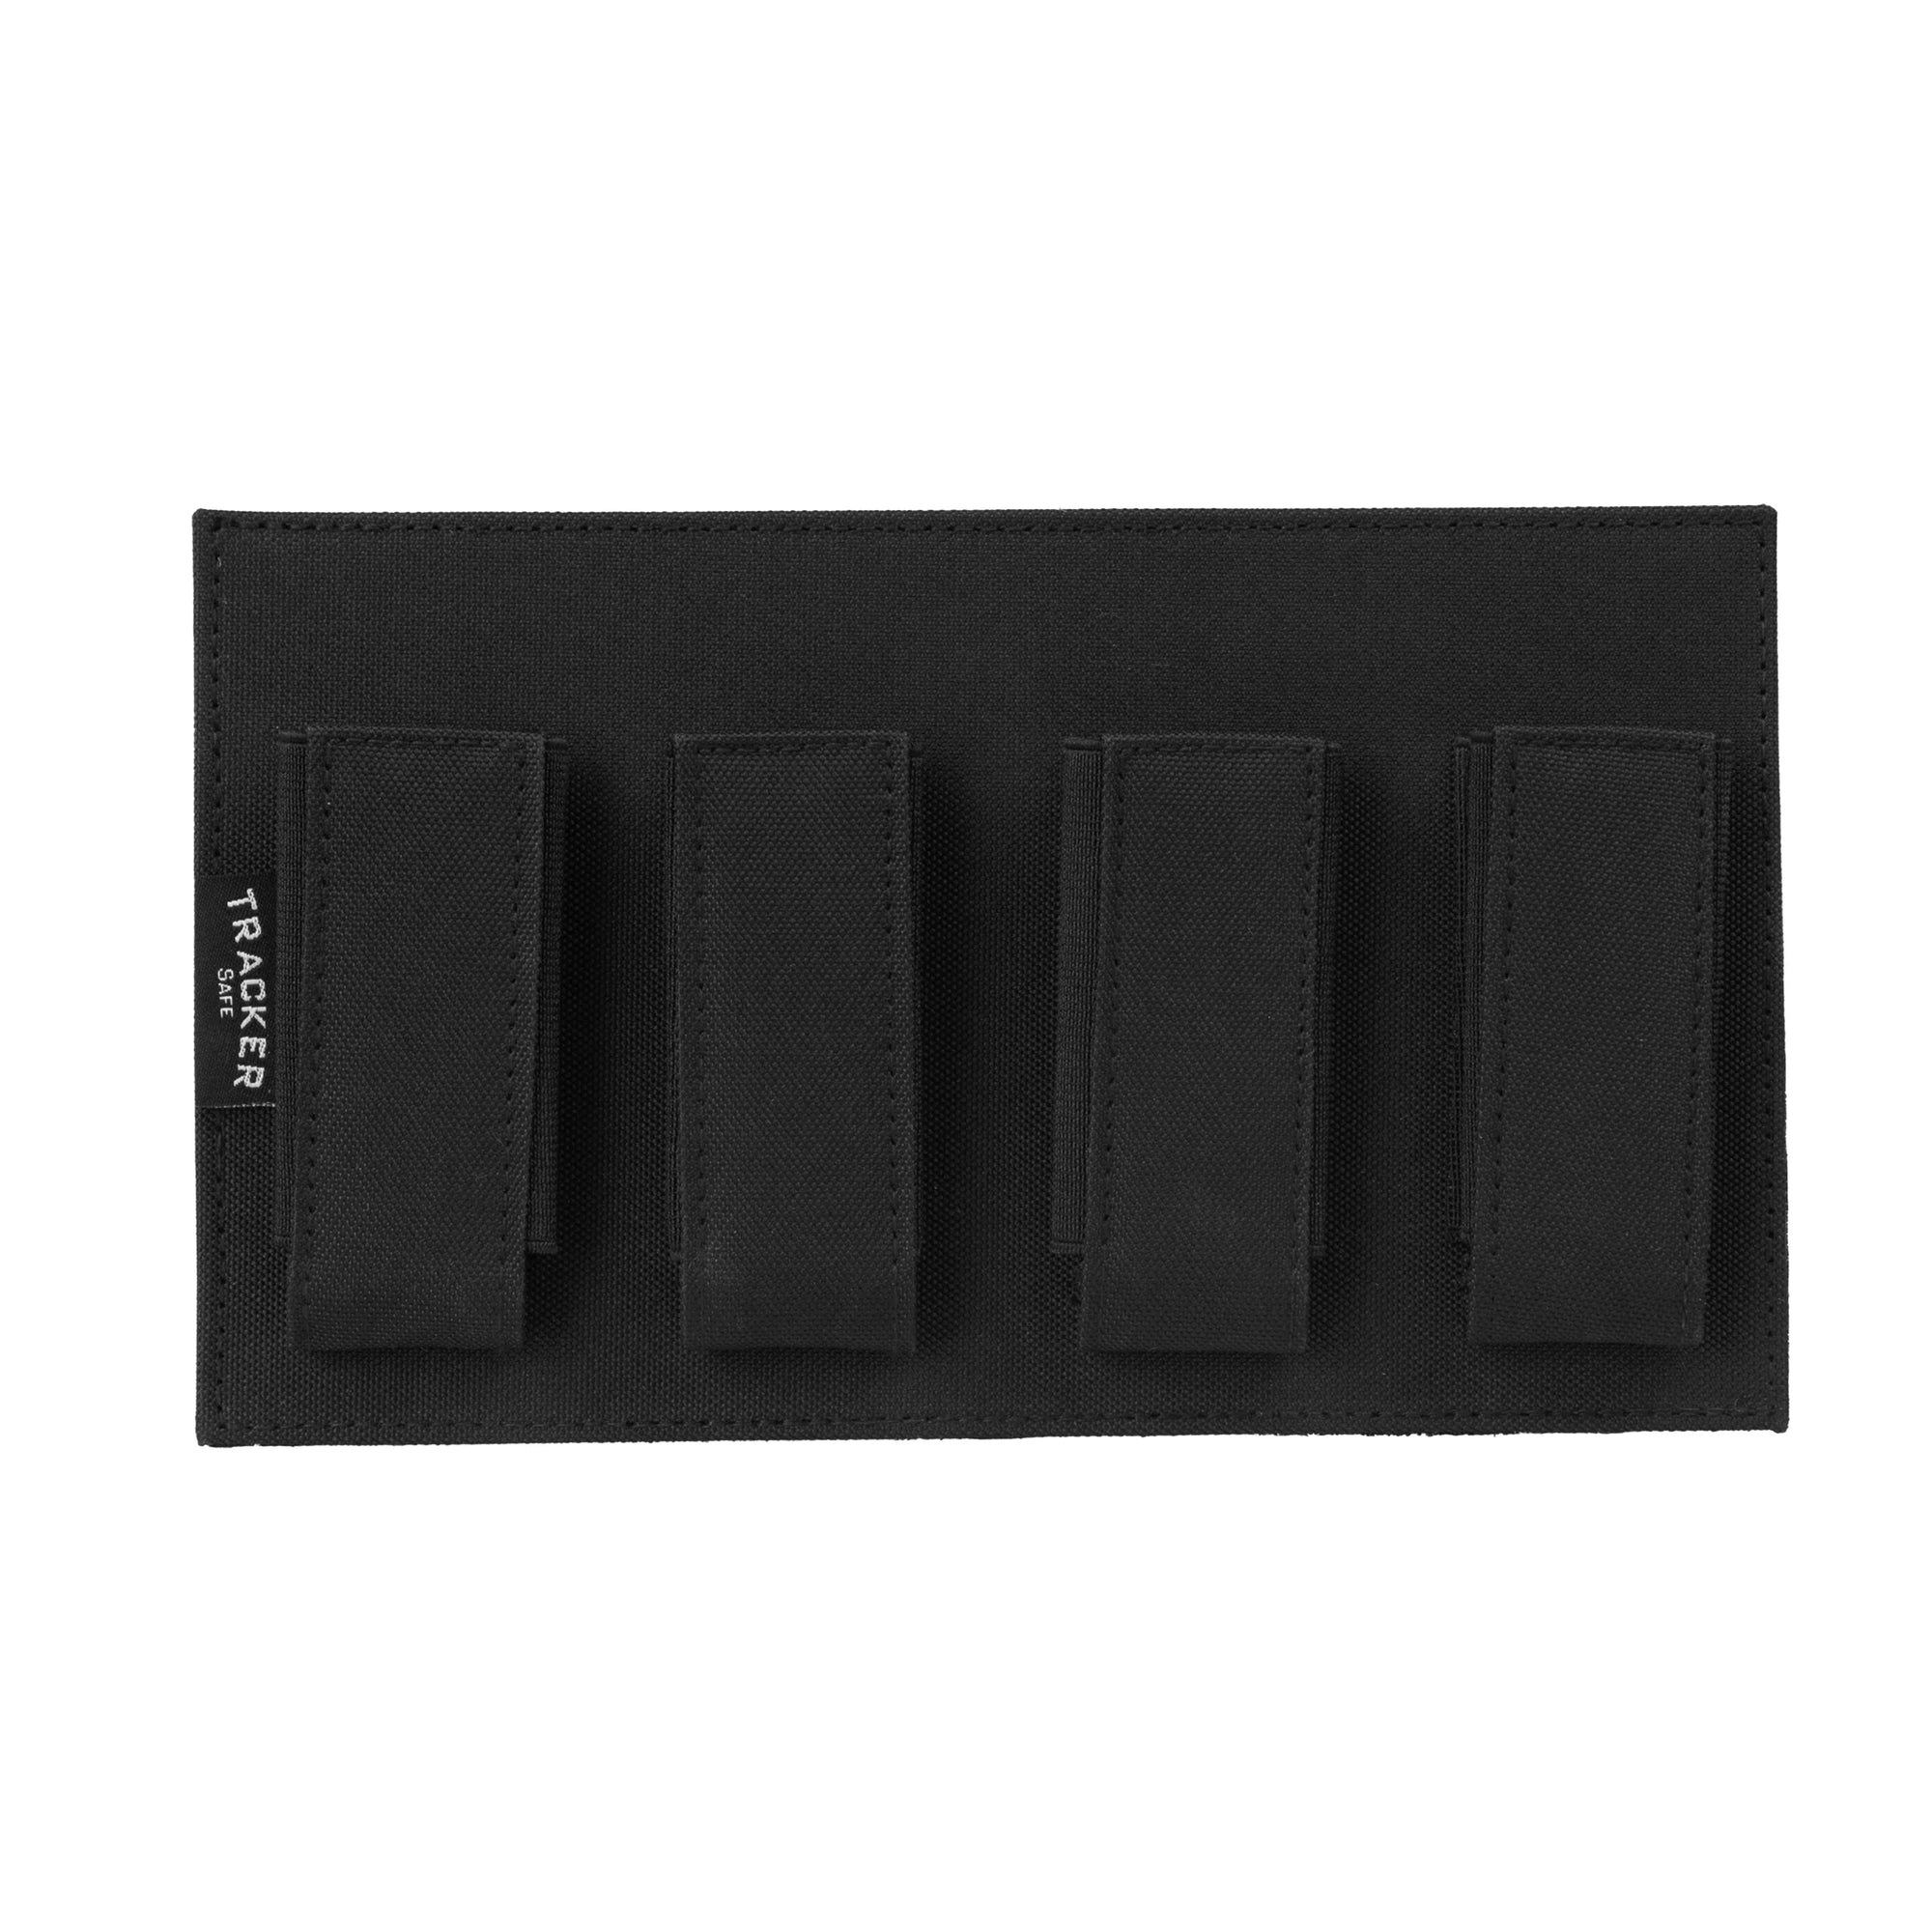 Tracker PPM4 4 Pistol Mag Holder with Mags